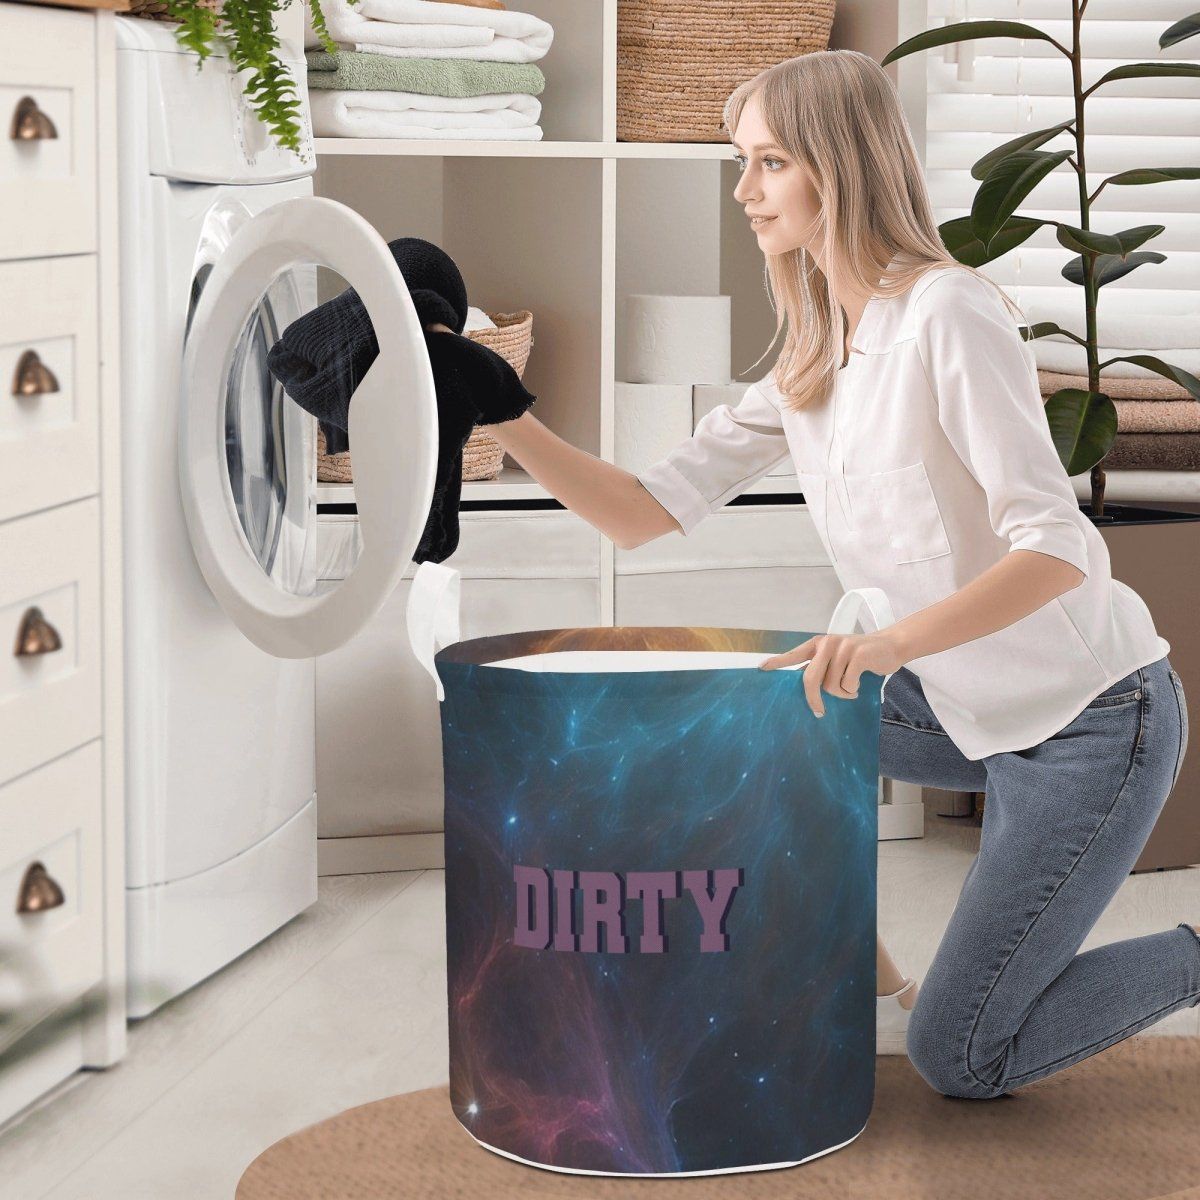 Round Dirty Laundry BasketRound Laundry Basket Durable and Stylish Solution for Dirty Clothes - Iron Phoenix GHG